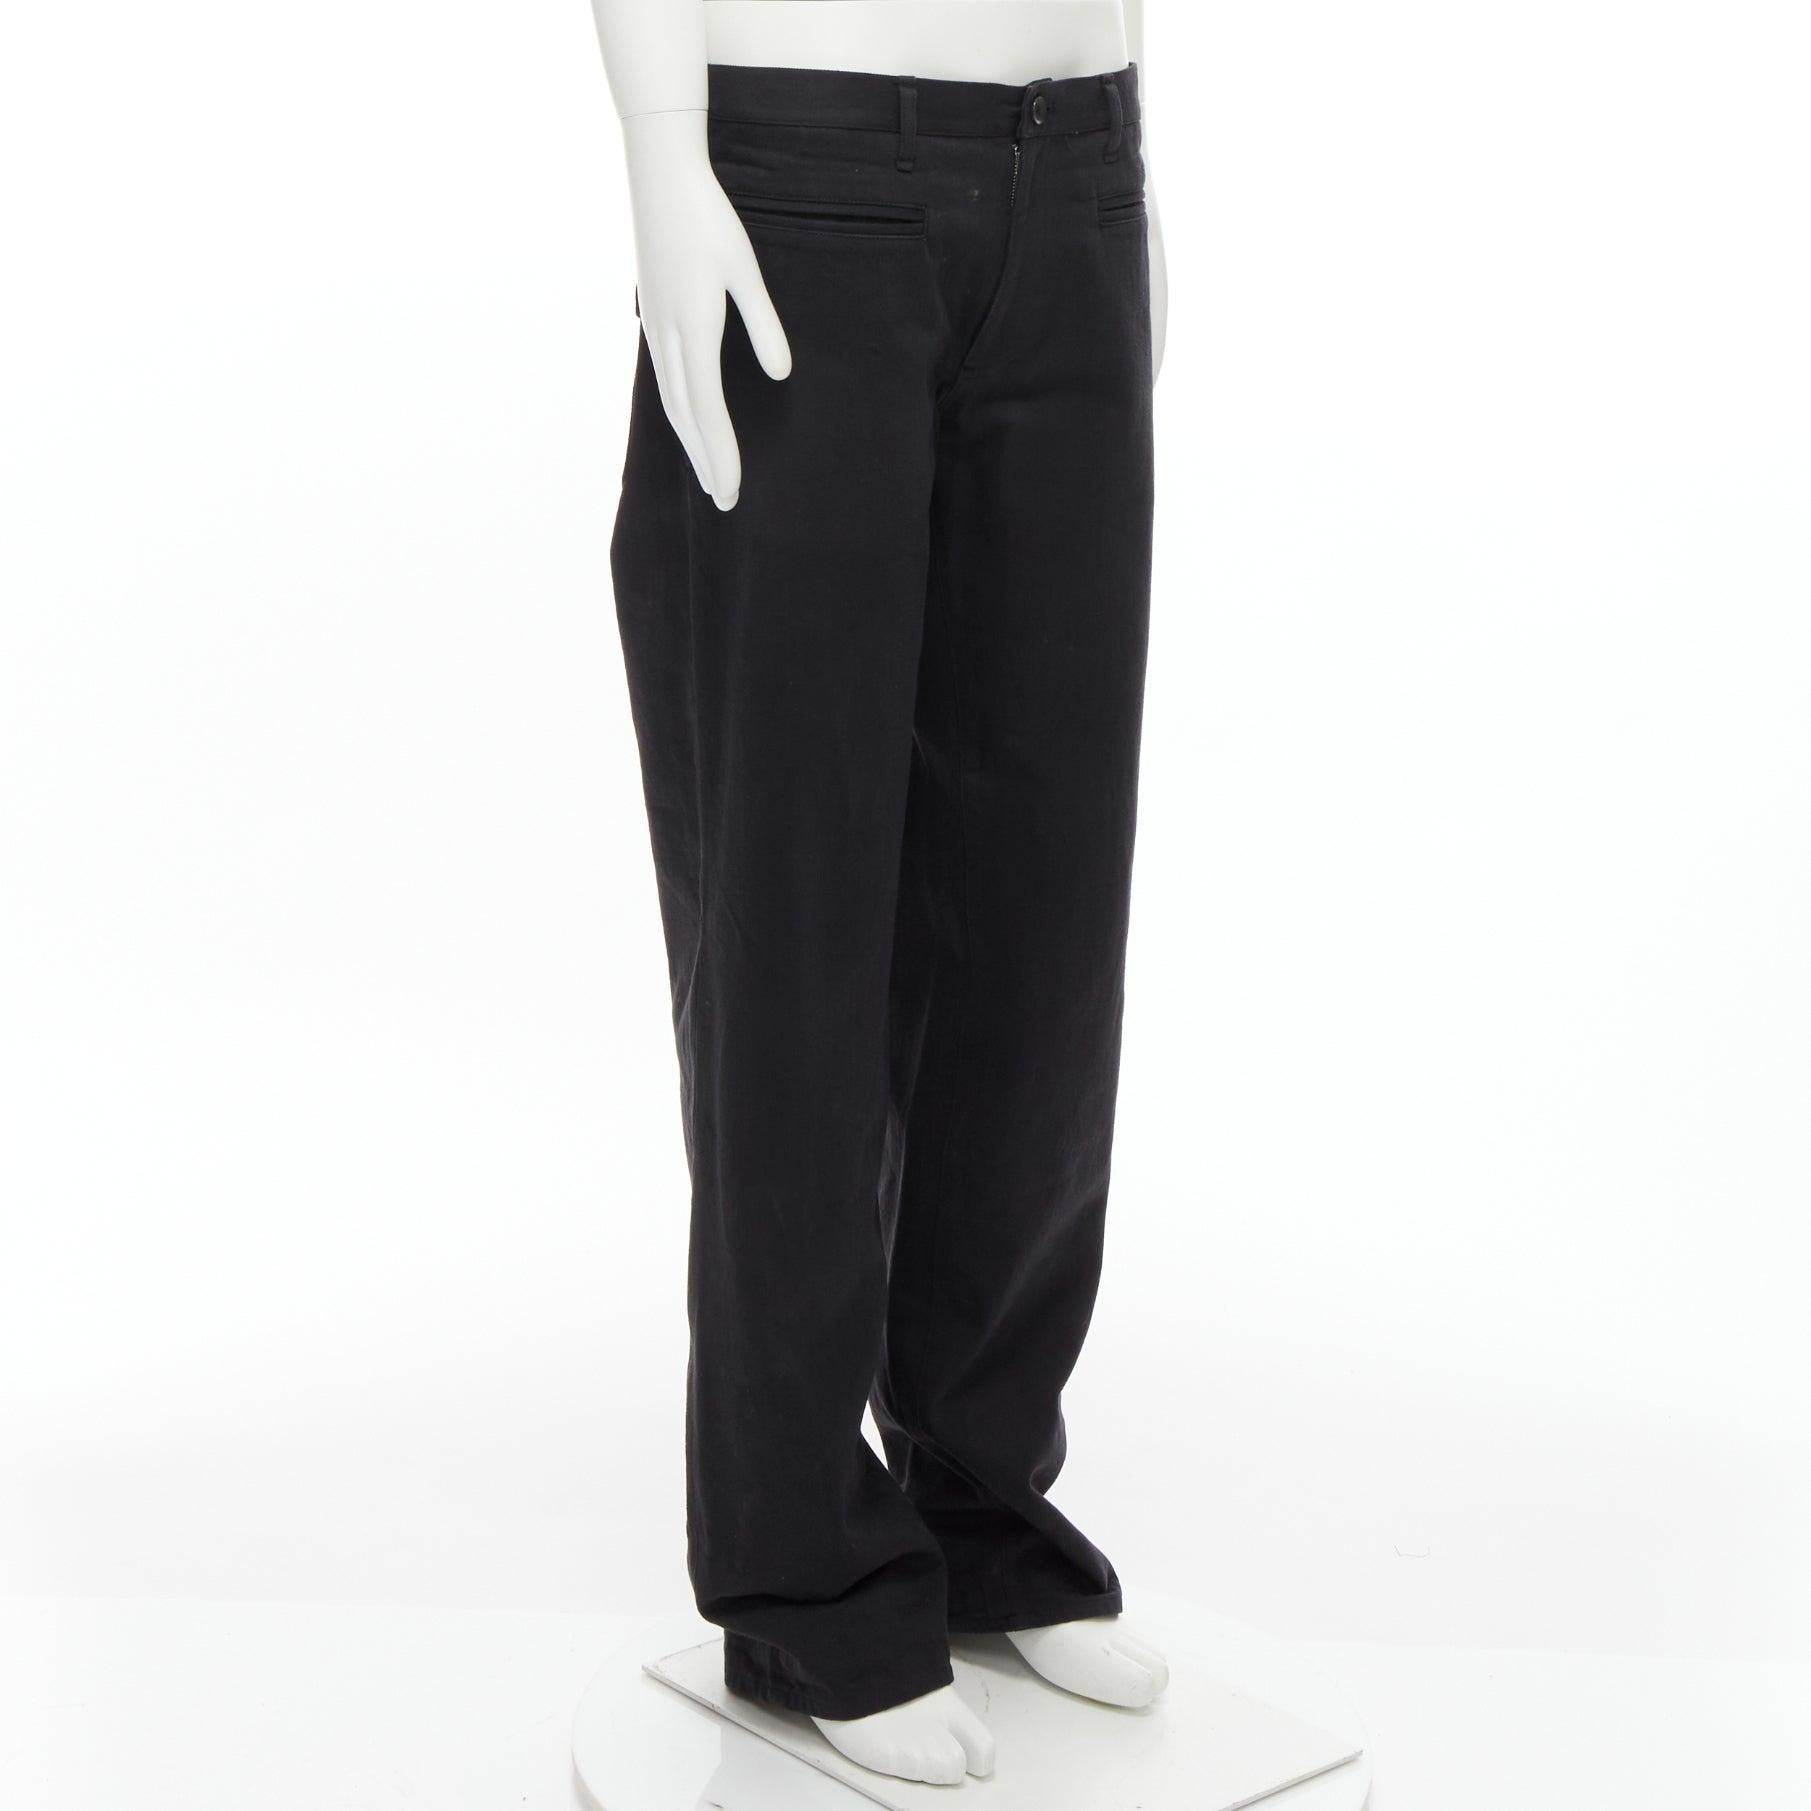 YOHJI YAMAMOTO HOMME black cotton back strap pocketed wide leg pants JP4 XL
Reference: CAWG/A00294
Brand: Yohji Yamamoto
Collection: Pour Homme
Material: Cotton
Color: Black
Pattern: Solid
Closure: Zip Fly
Extra Details: Back belt with back flap